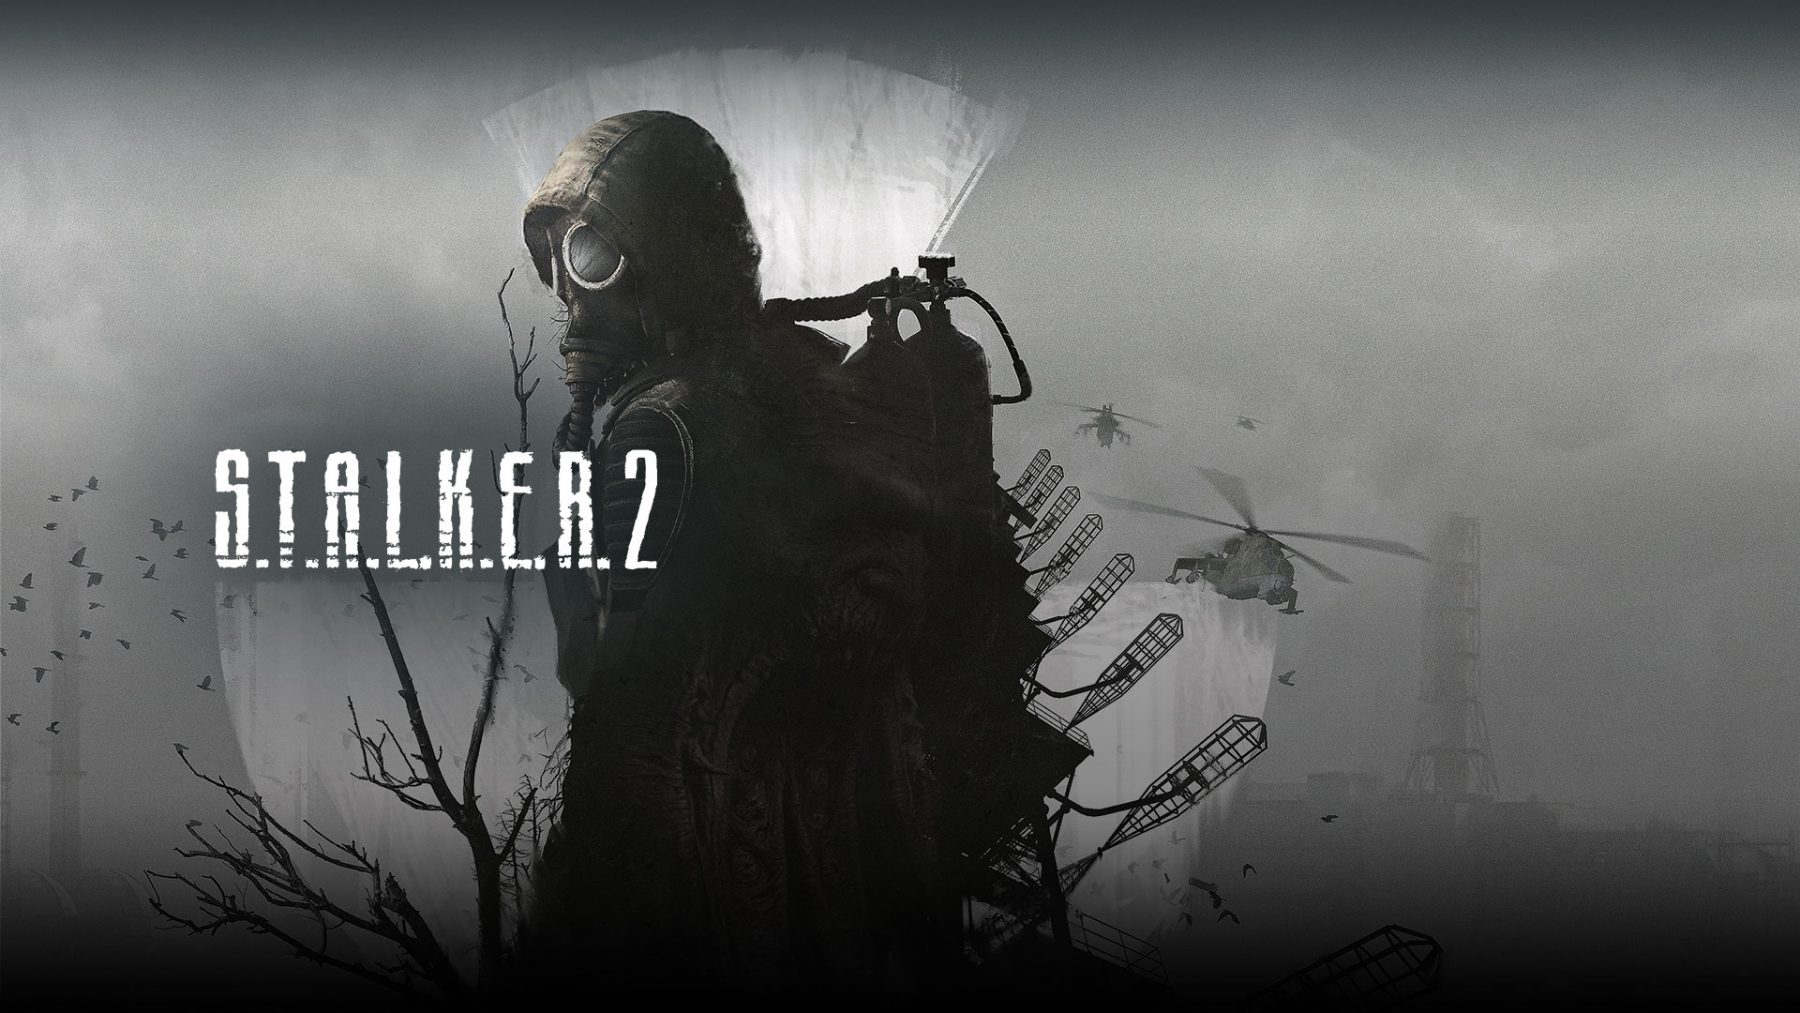 S.T.A.L.K.E.R. 2 Wallpapers